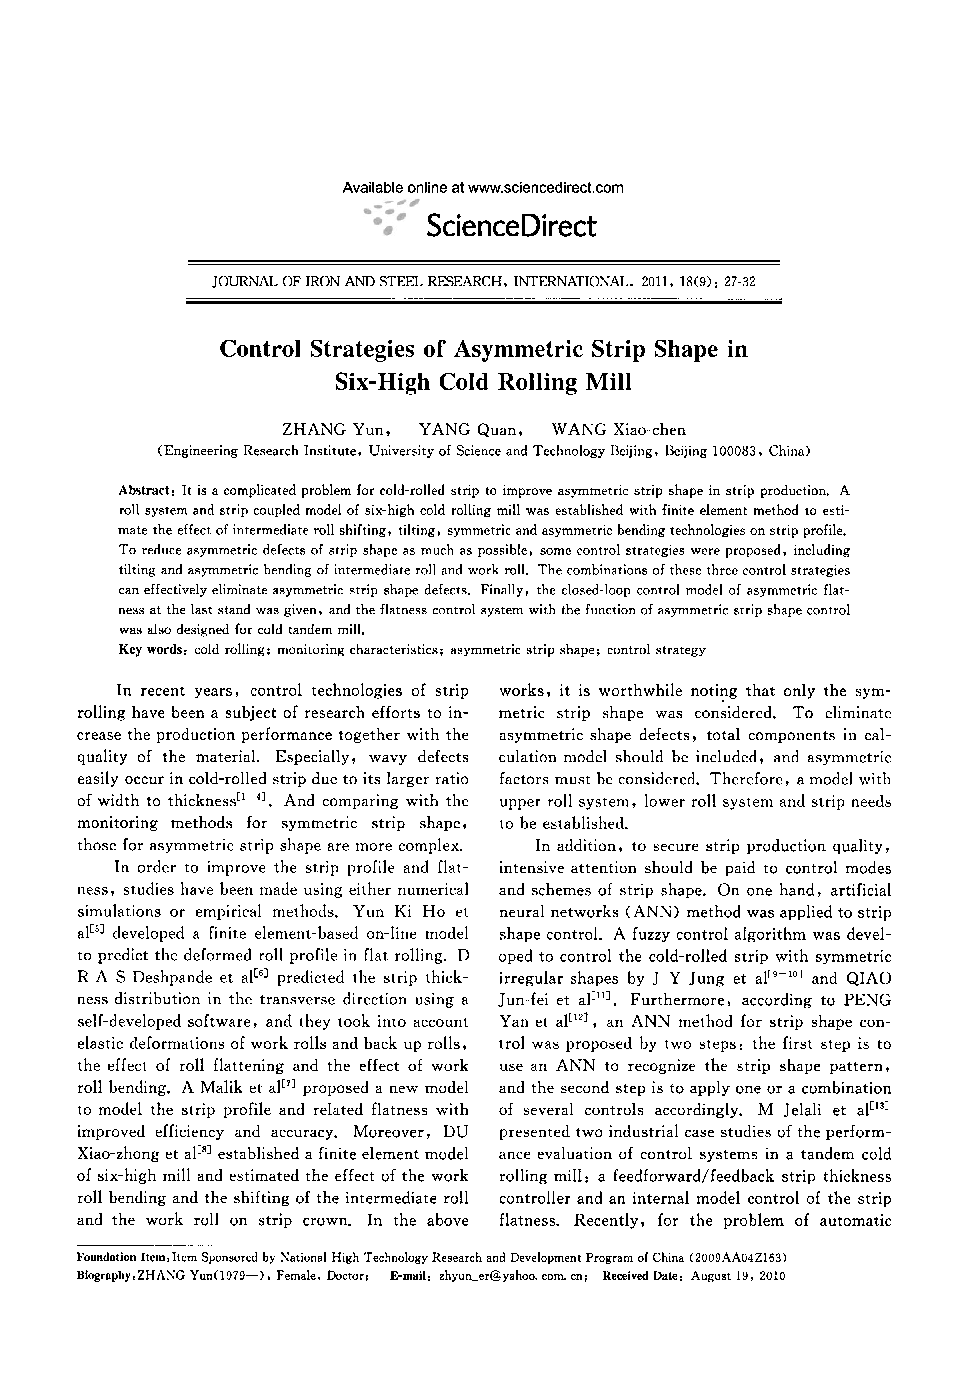 Control Strategies of Asymmetric Strip Shape in Six-High Cold Rolling Mill